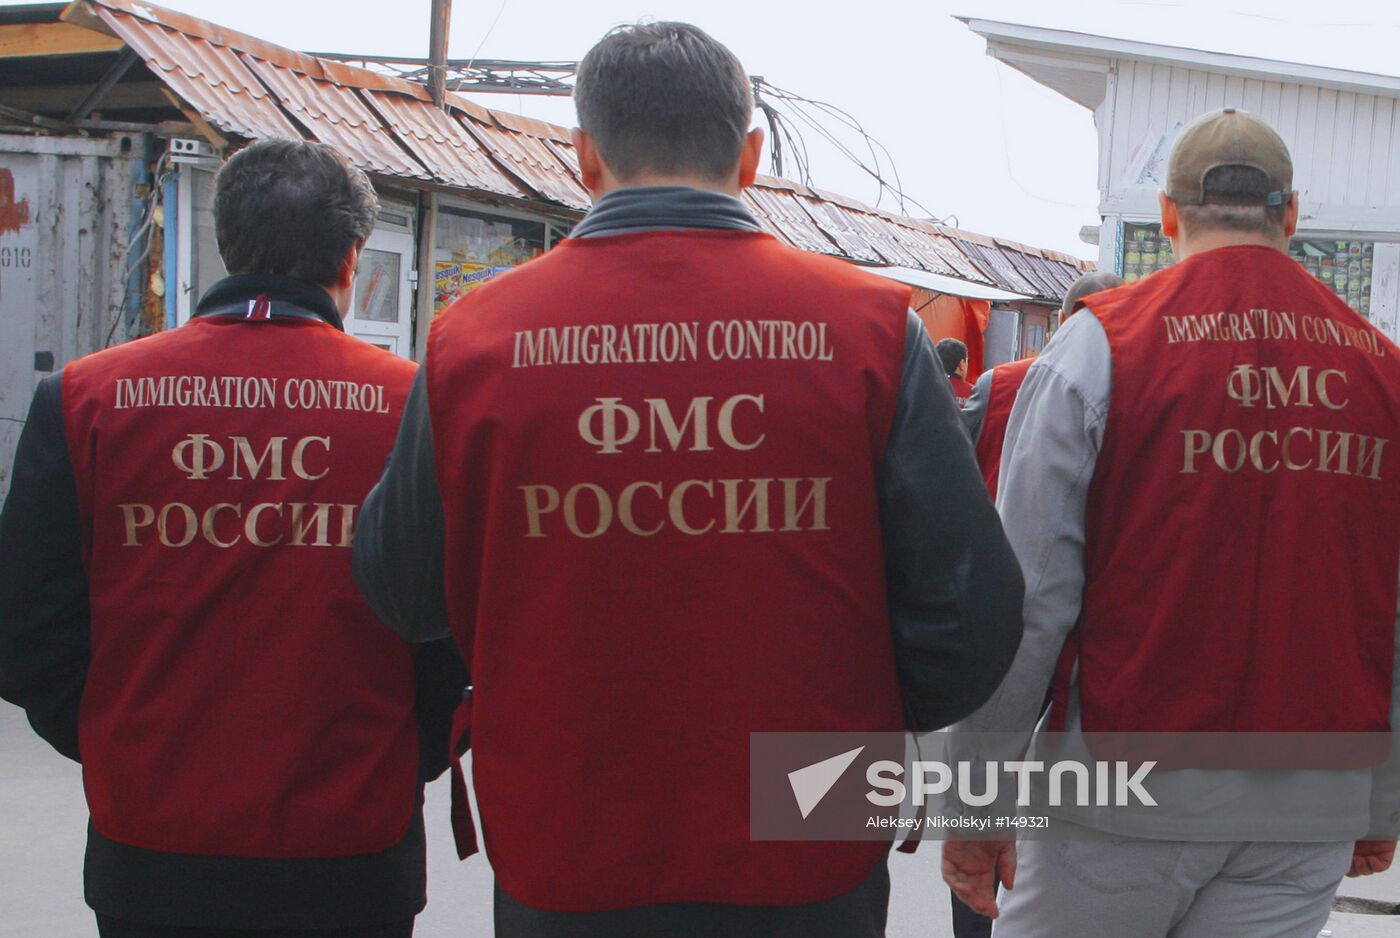 FEDERAL MIGRATION SERVICE INSPECTED MOSCOW MARKETS